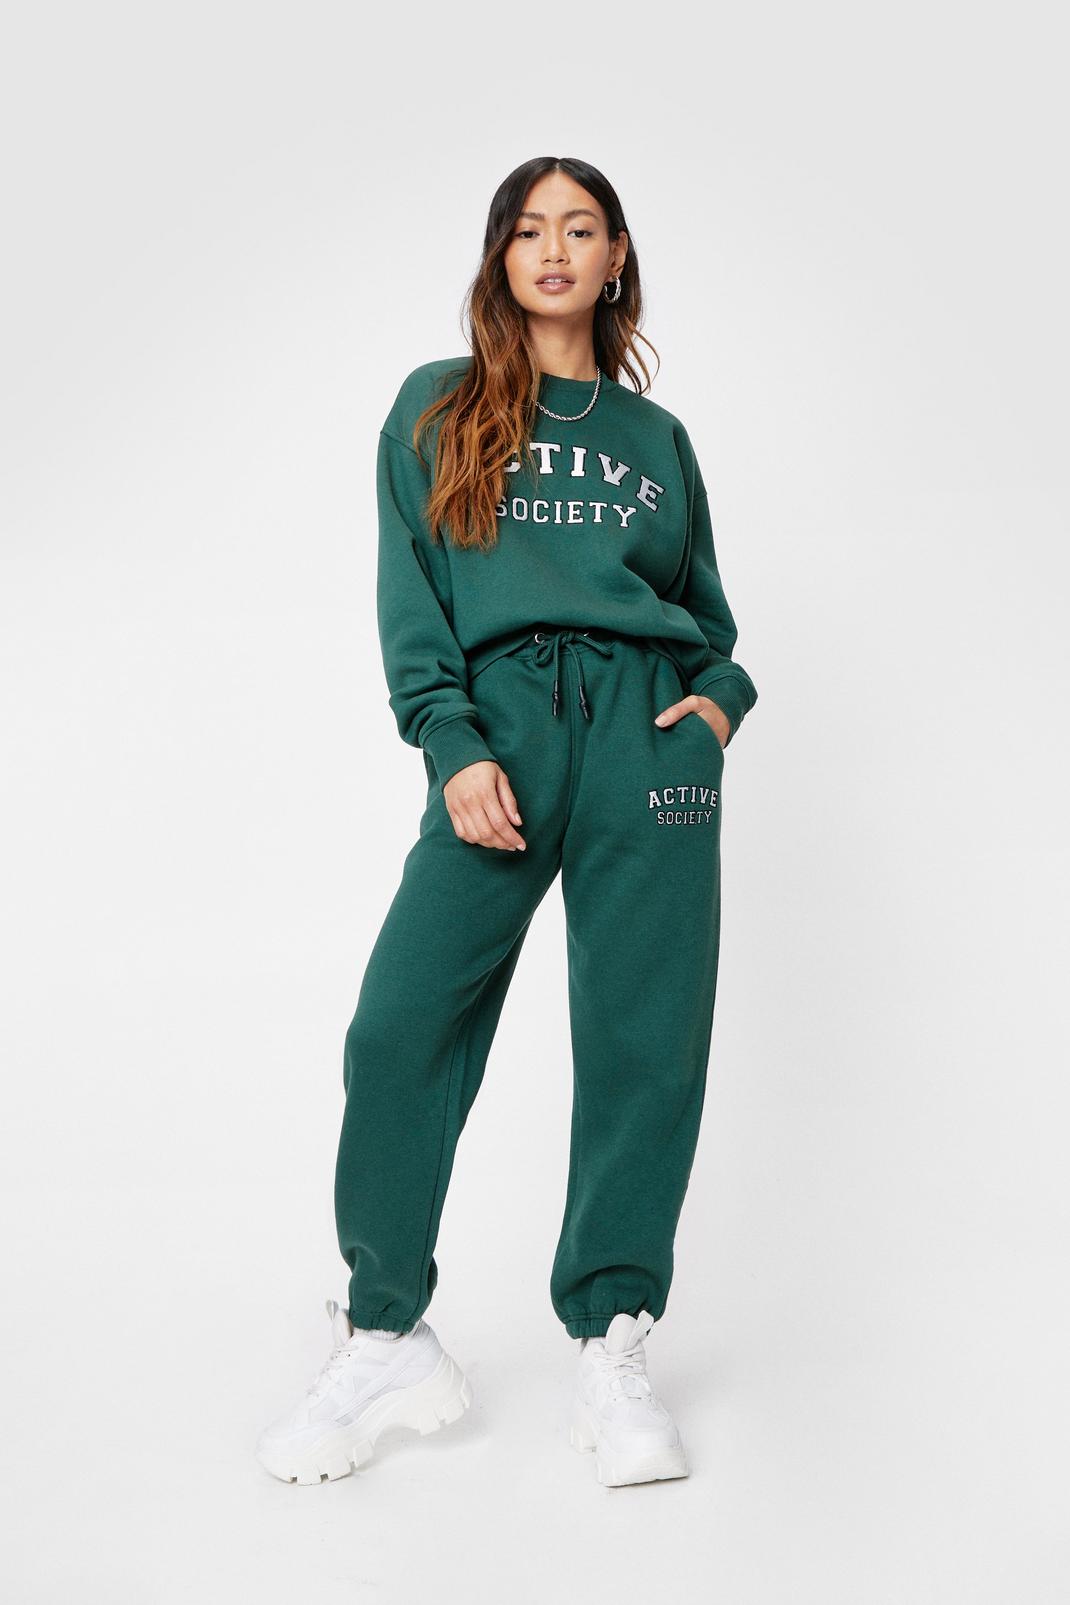 Green Petite Active Society High Waisted Tracksuit Pants image number 1